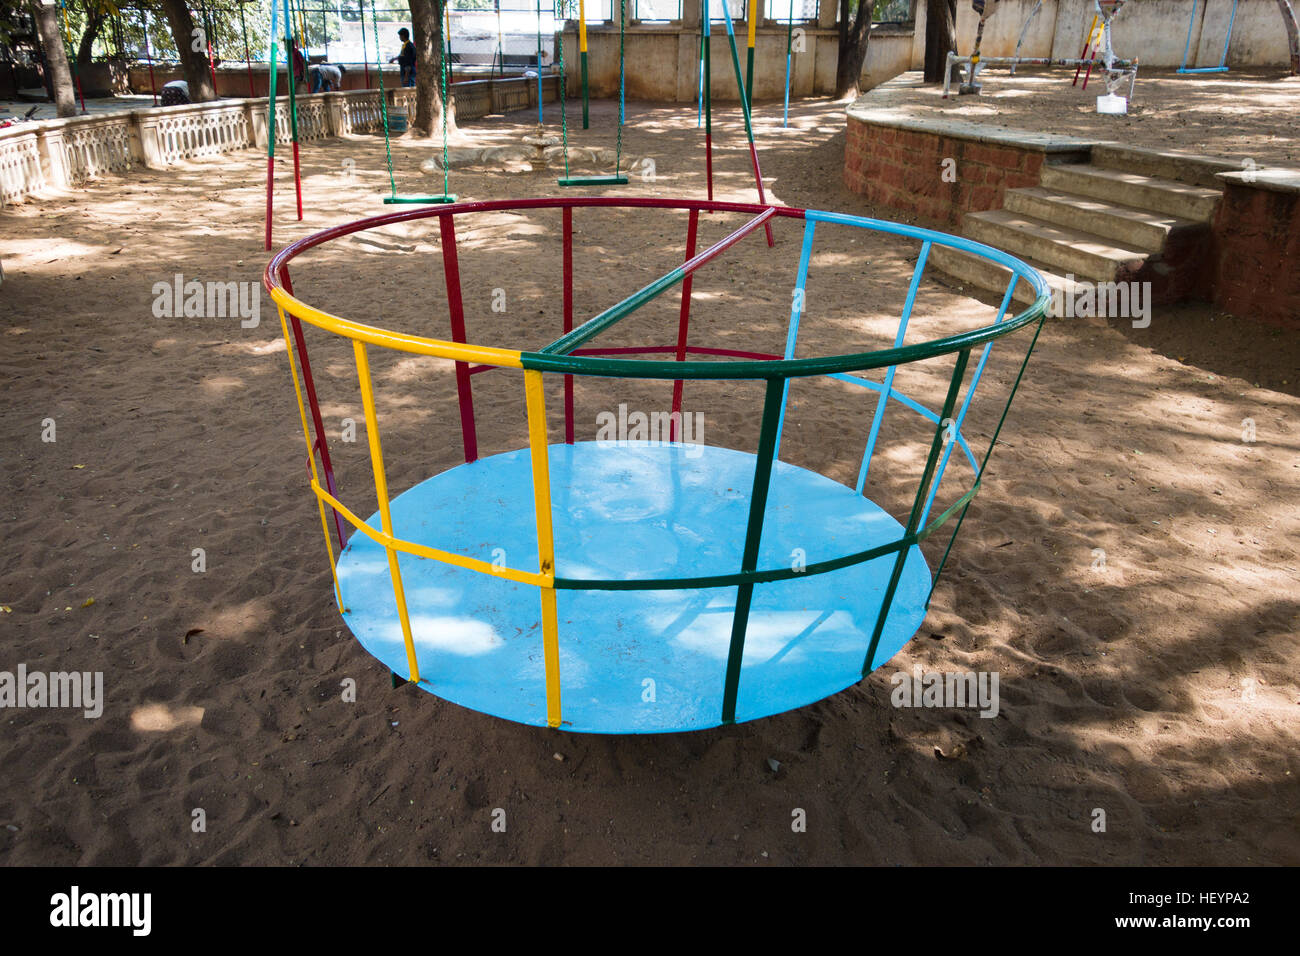 multi-colored childrens play area equipment Stock Photo